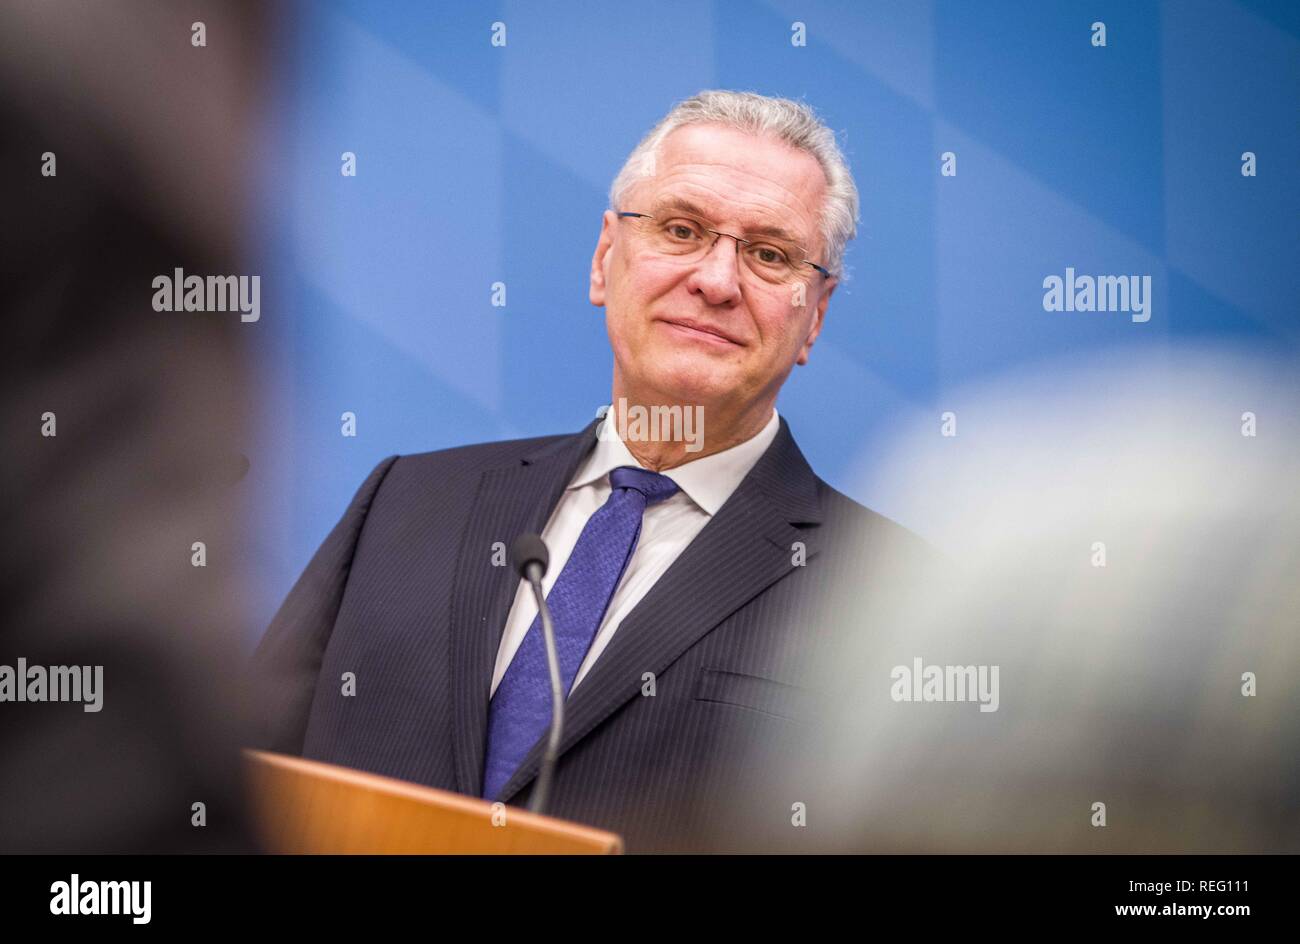 Munich, Bavaria, Germany. 21st Jan, 2019. Bavarian Interior Minister JOACHIMM HERRMANN during the presentation of the Halbjahrsbilanz of the Grenzpolizei (Half Year Statistics of the Border Police). The Bavarian Innenminister Joachim Herrmann and the Direktor der Bayerischen Grenzpolizei Alois Mannichl presented the half year statistics of the controversial border police (Grenzpolizei) that operates at the border crossings between Germany and Austria. Herrmann announced plans to double the border protection police by 2023.ment includ Credit: ZUMA Press, Inc./Alamy Live News Stock Photo